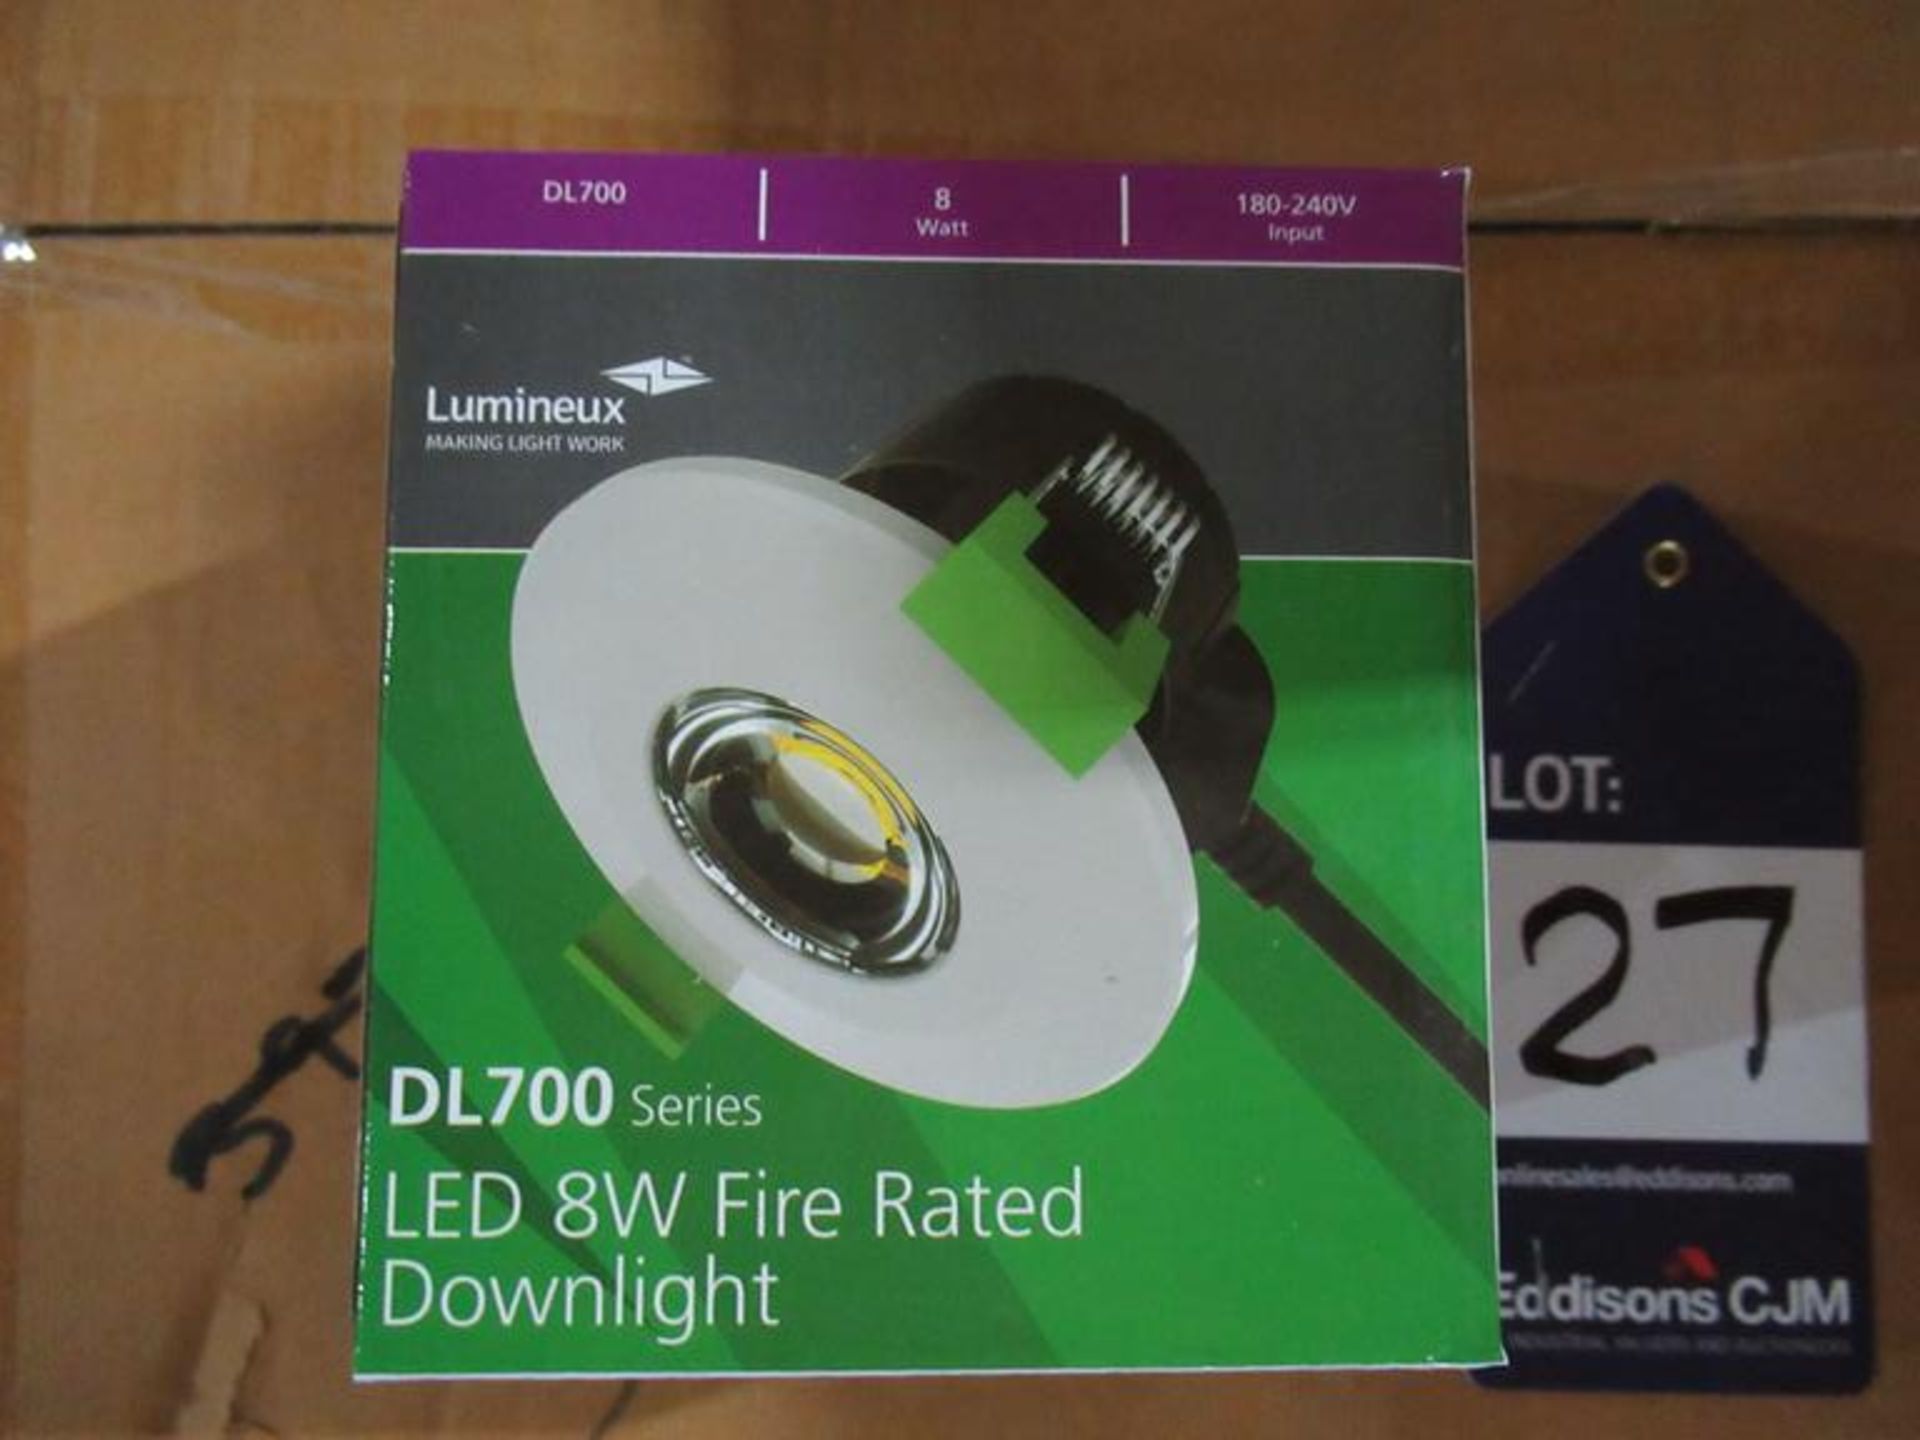 40 x LED 8w Fire Rated Downlights 180/240V 6000K OEM Trade Price £460